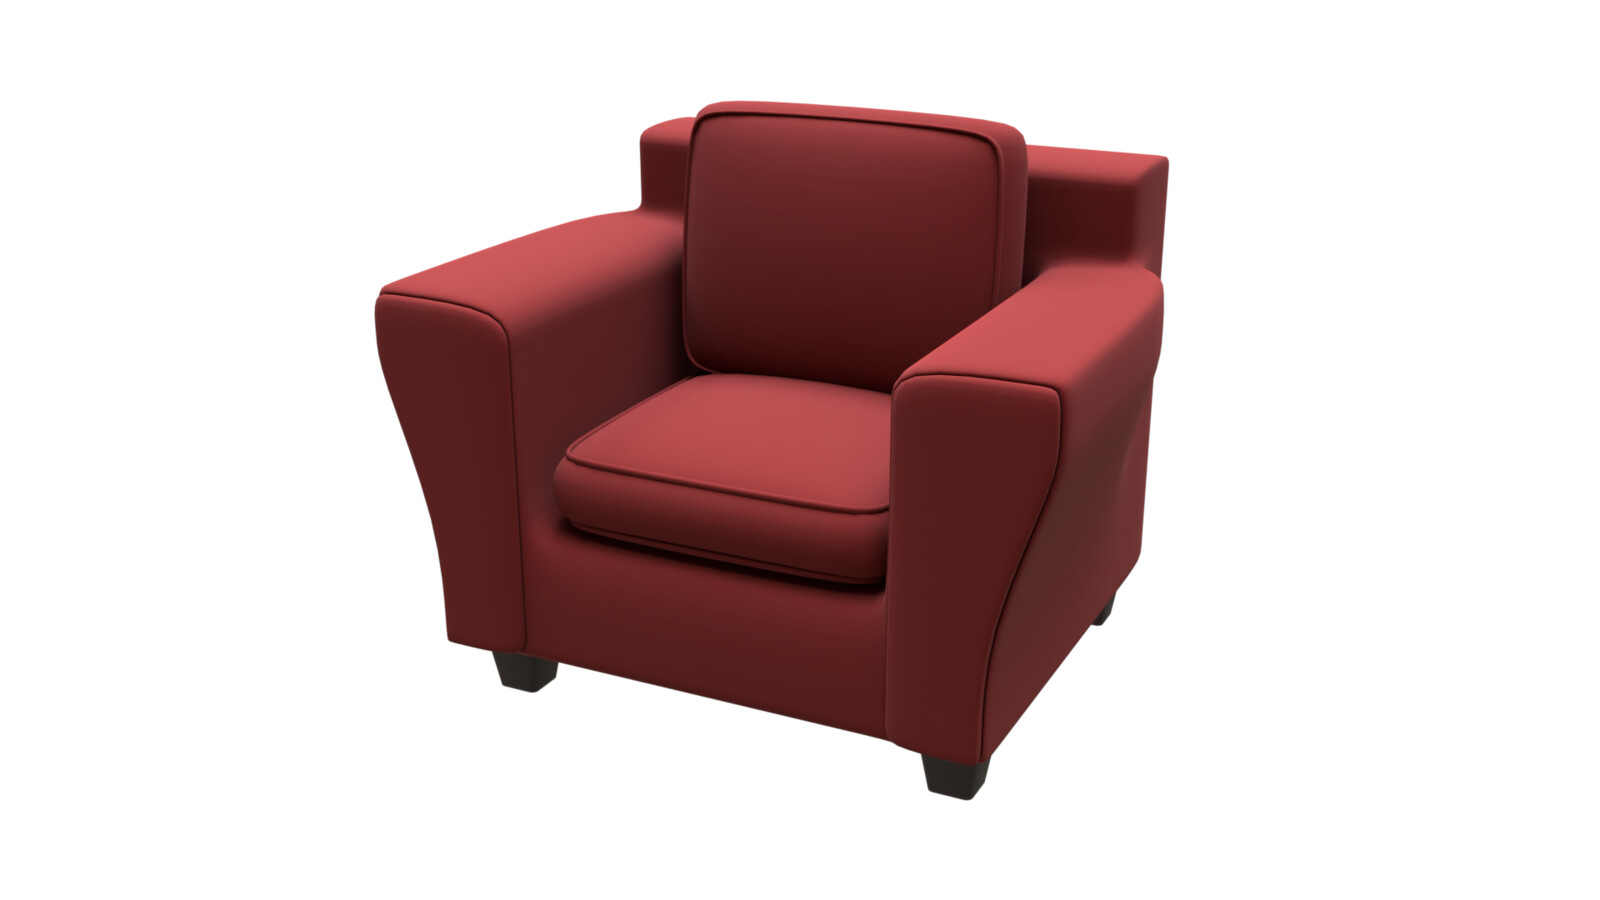 Red Sofa Chair